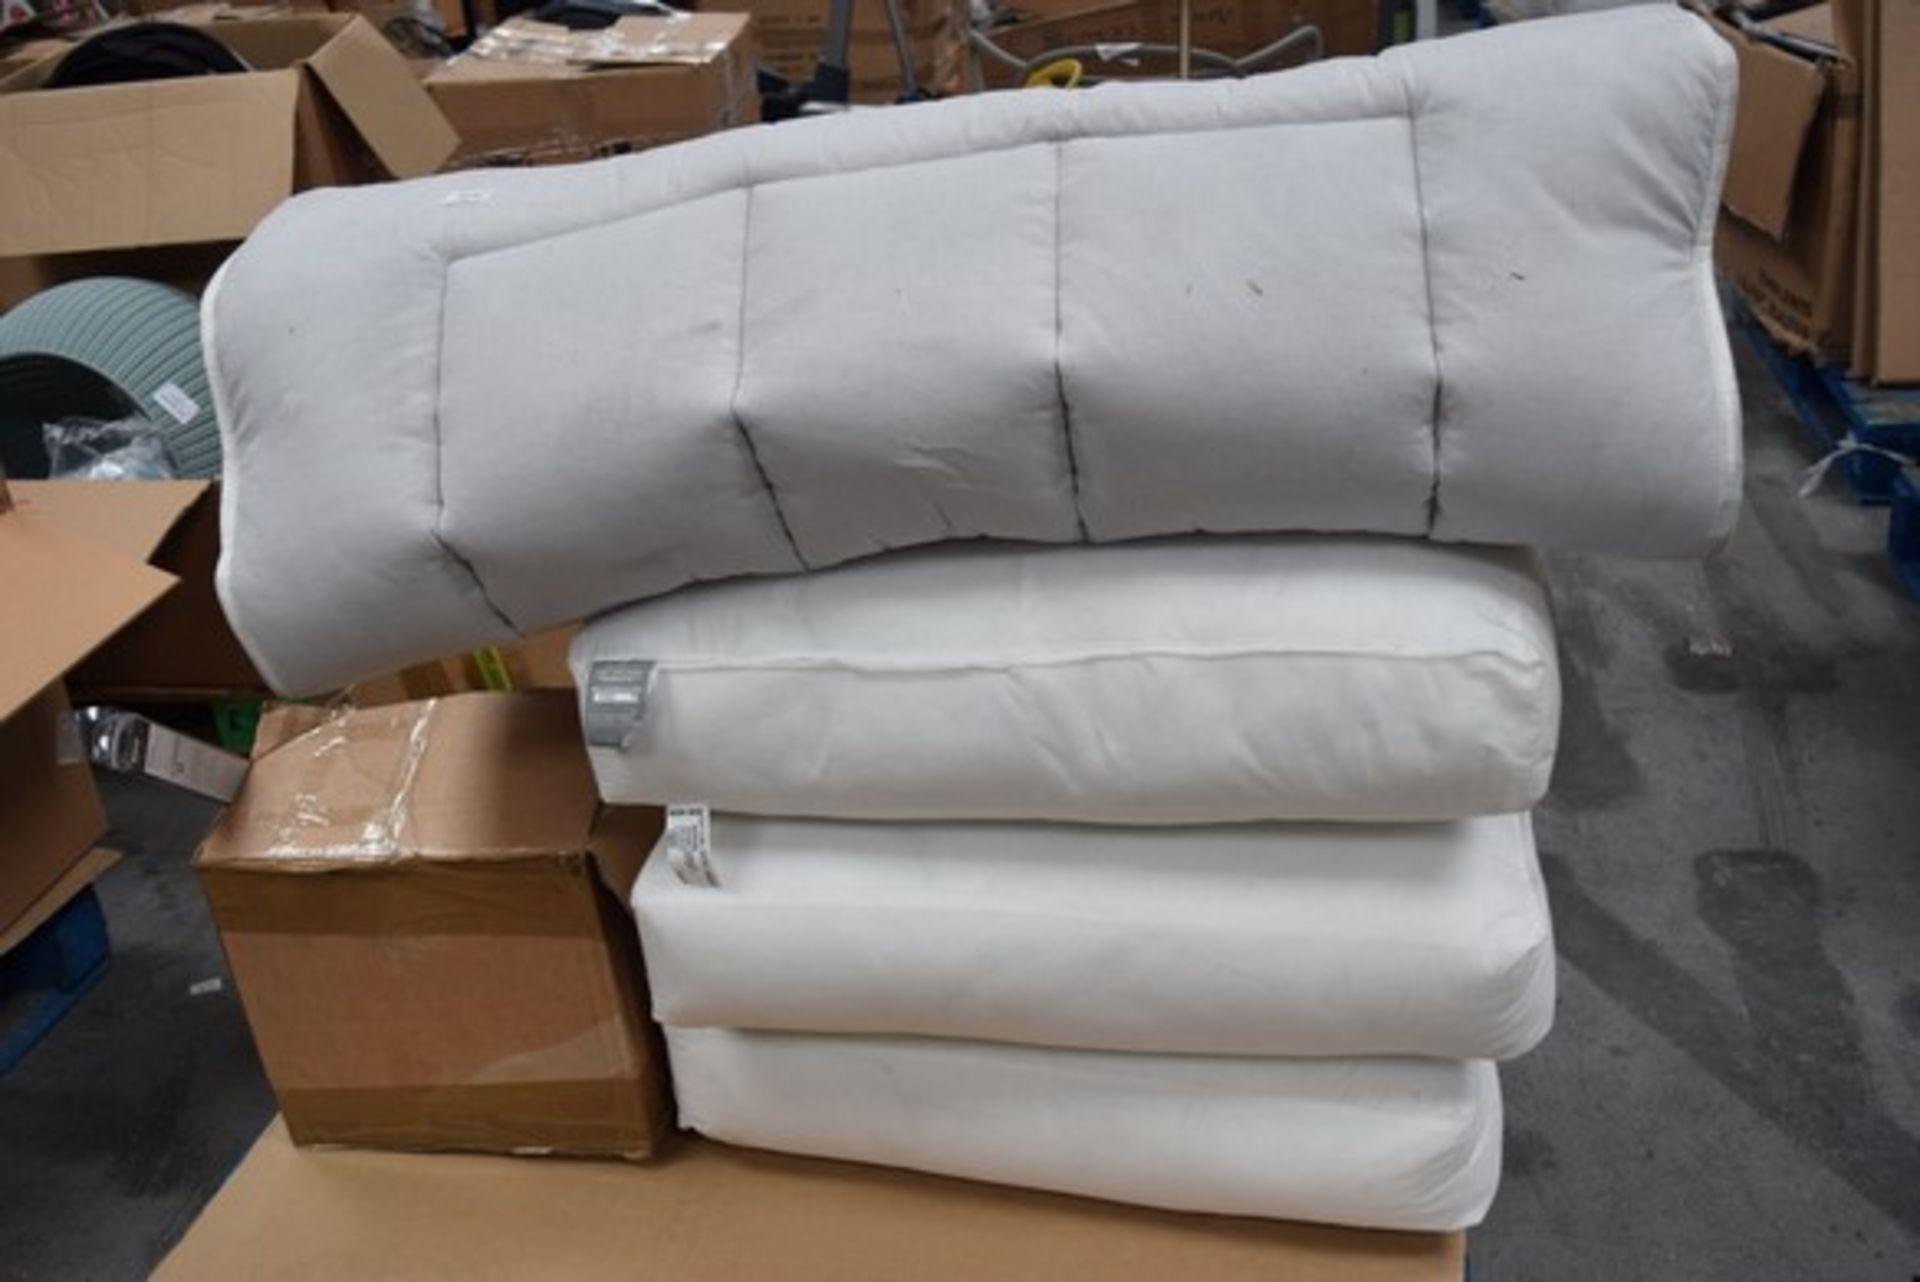 1 x DESIGNER MATTRESS TOPPER IN (UNKNOWN SIZE) RRP £60 *PLEASE NOTE THAT THE BID PRICE IS MULTIPLIED